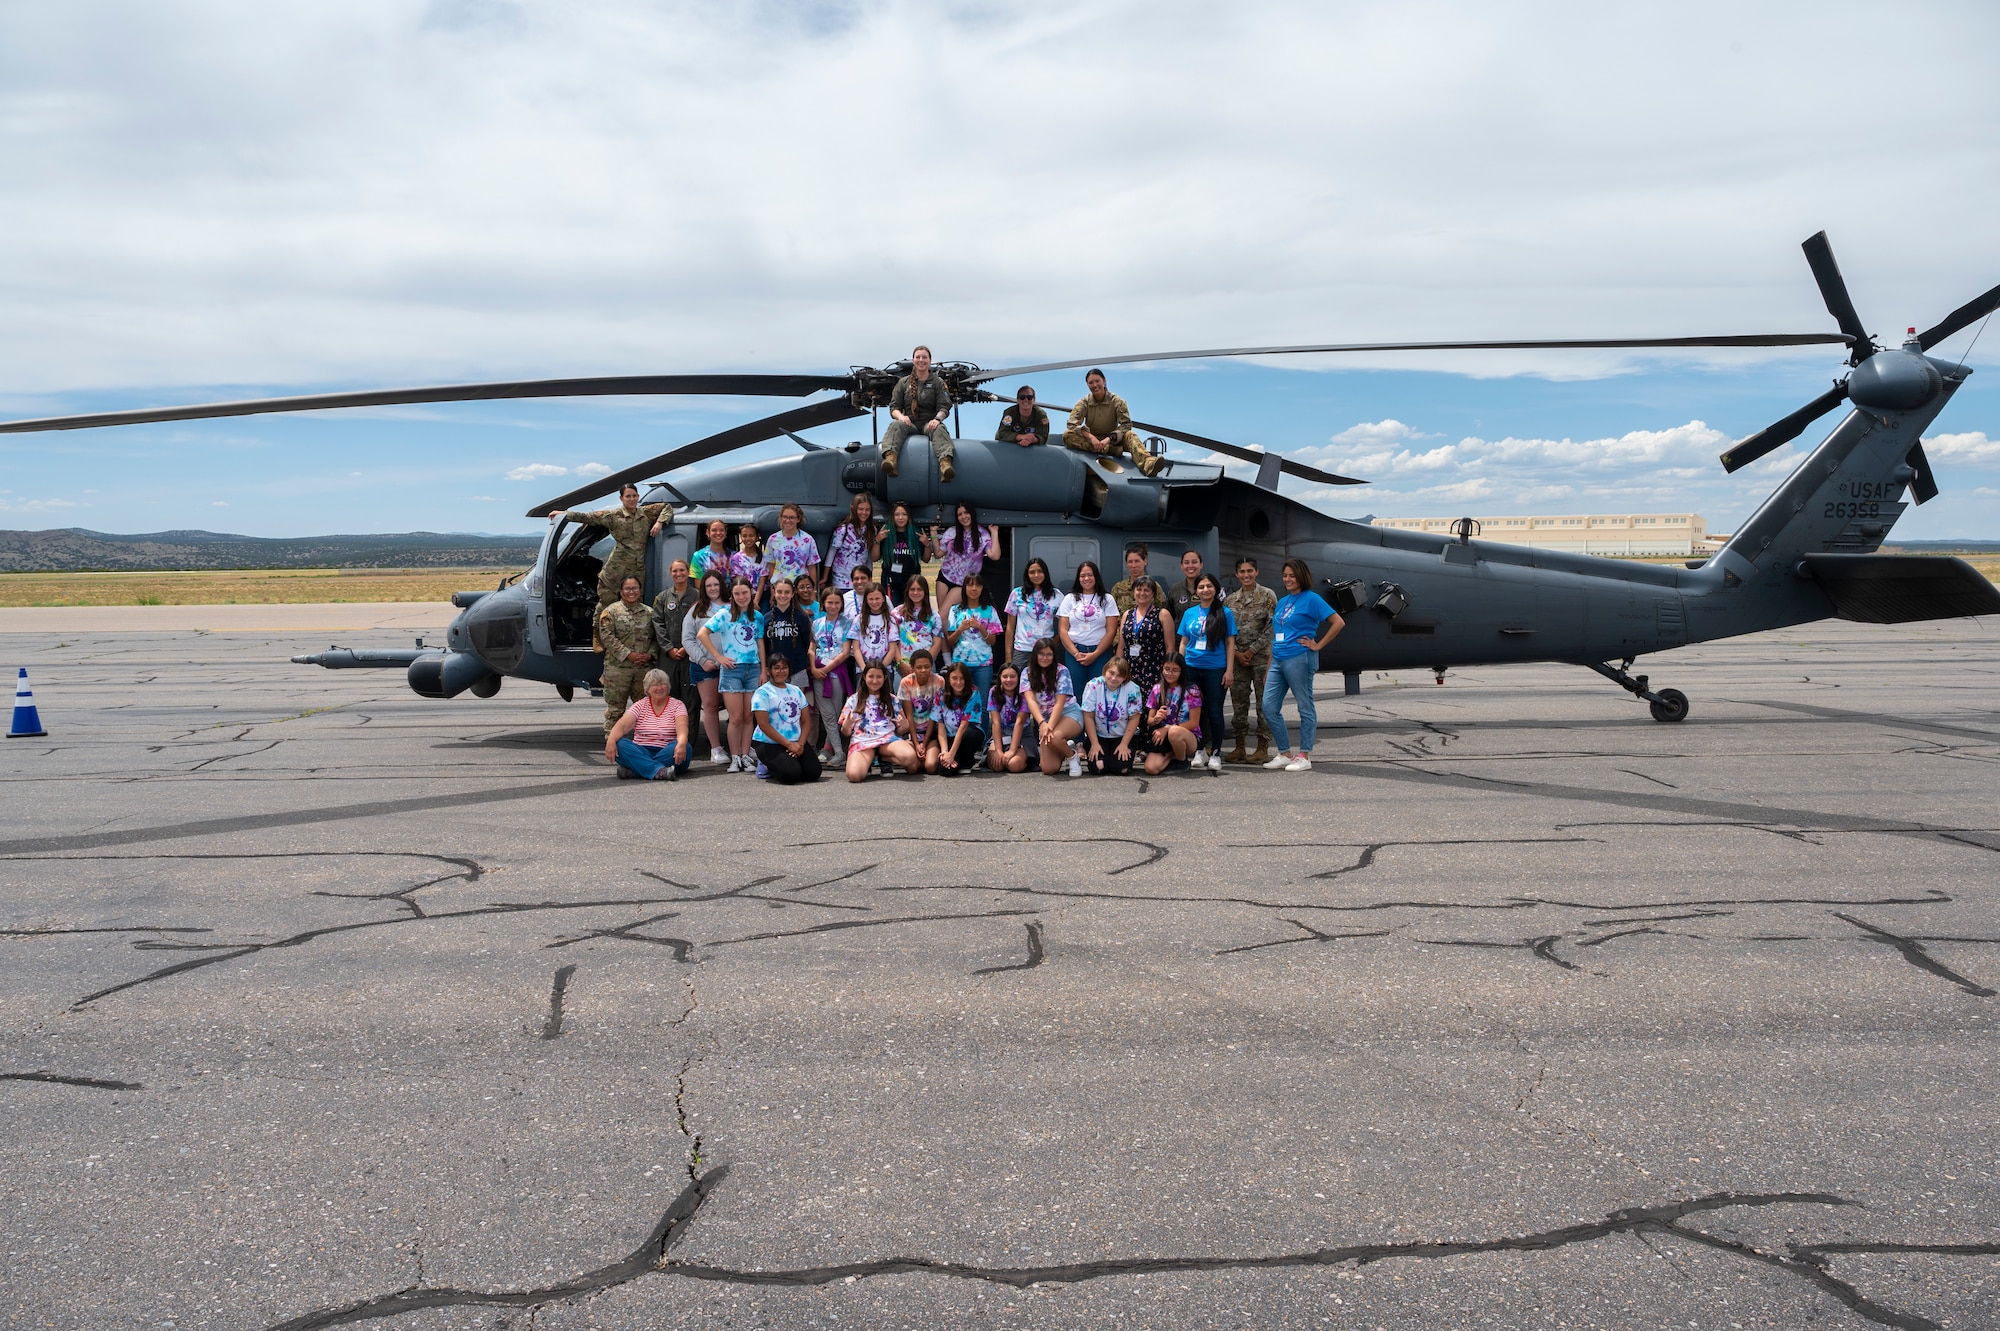 A group poses in front of a helicopter.